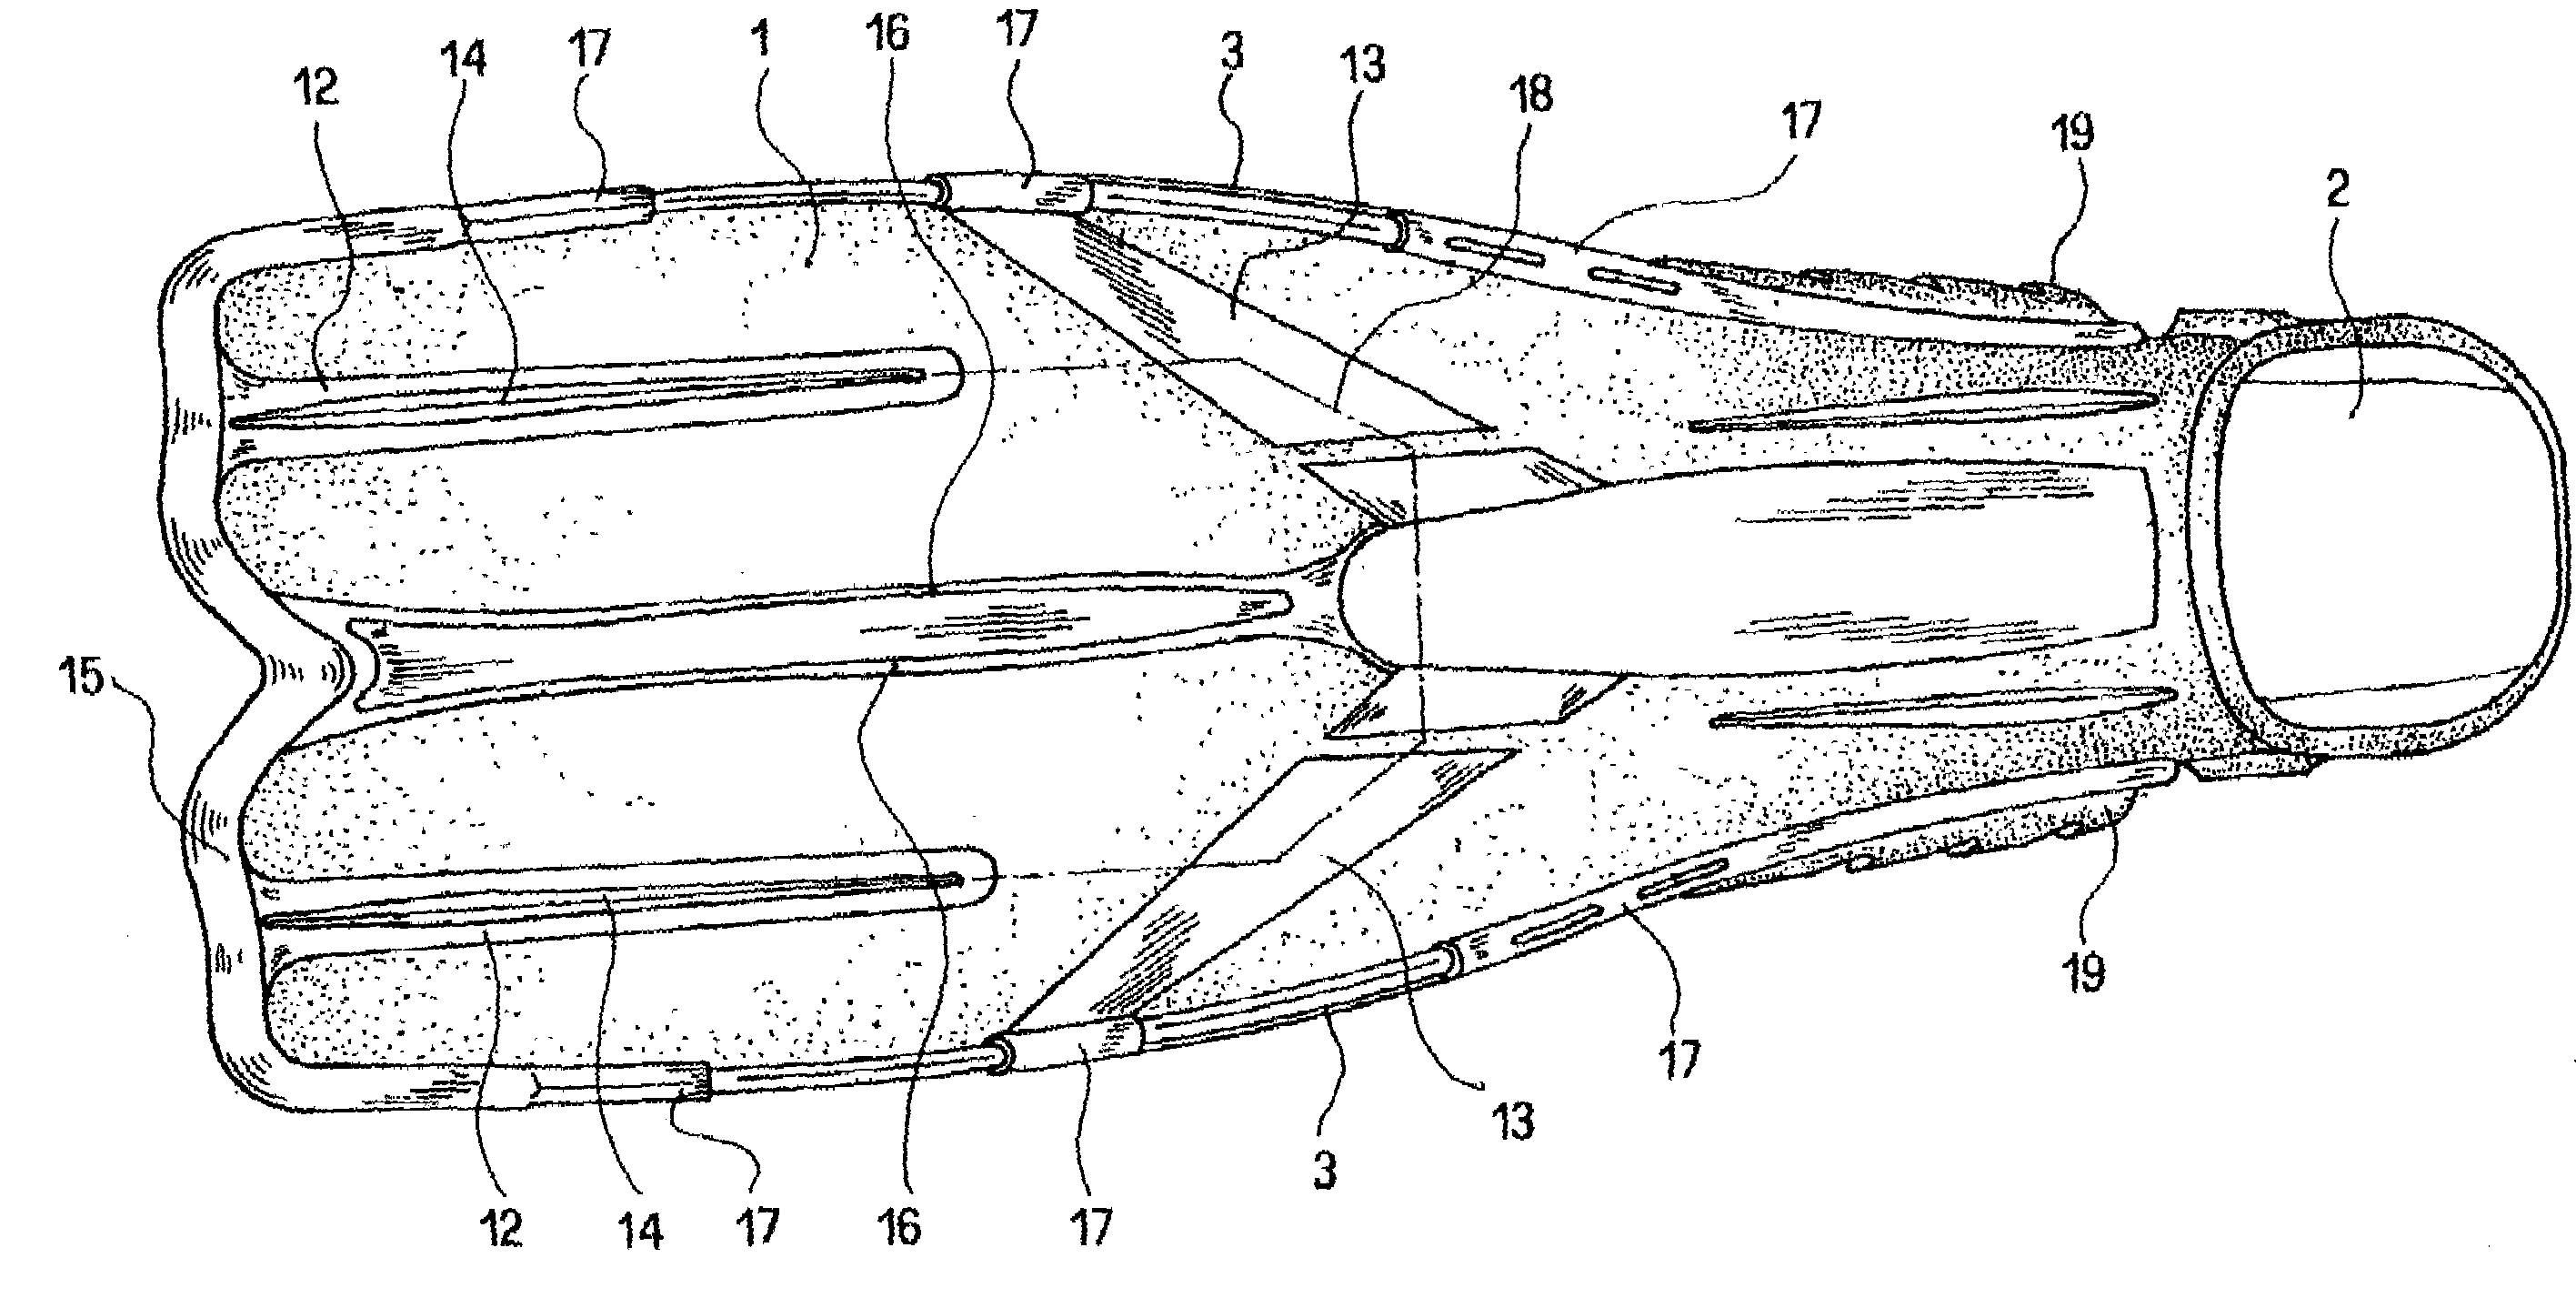 Differentiated rigidity swimming fin with hydrodynamically designed rearward shoe strap connection